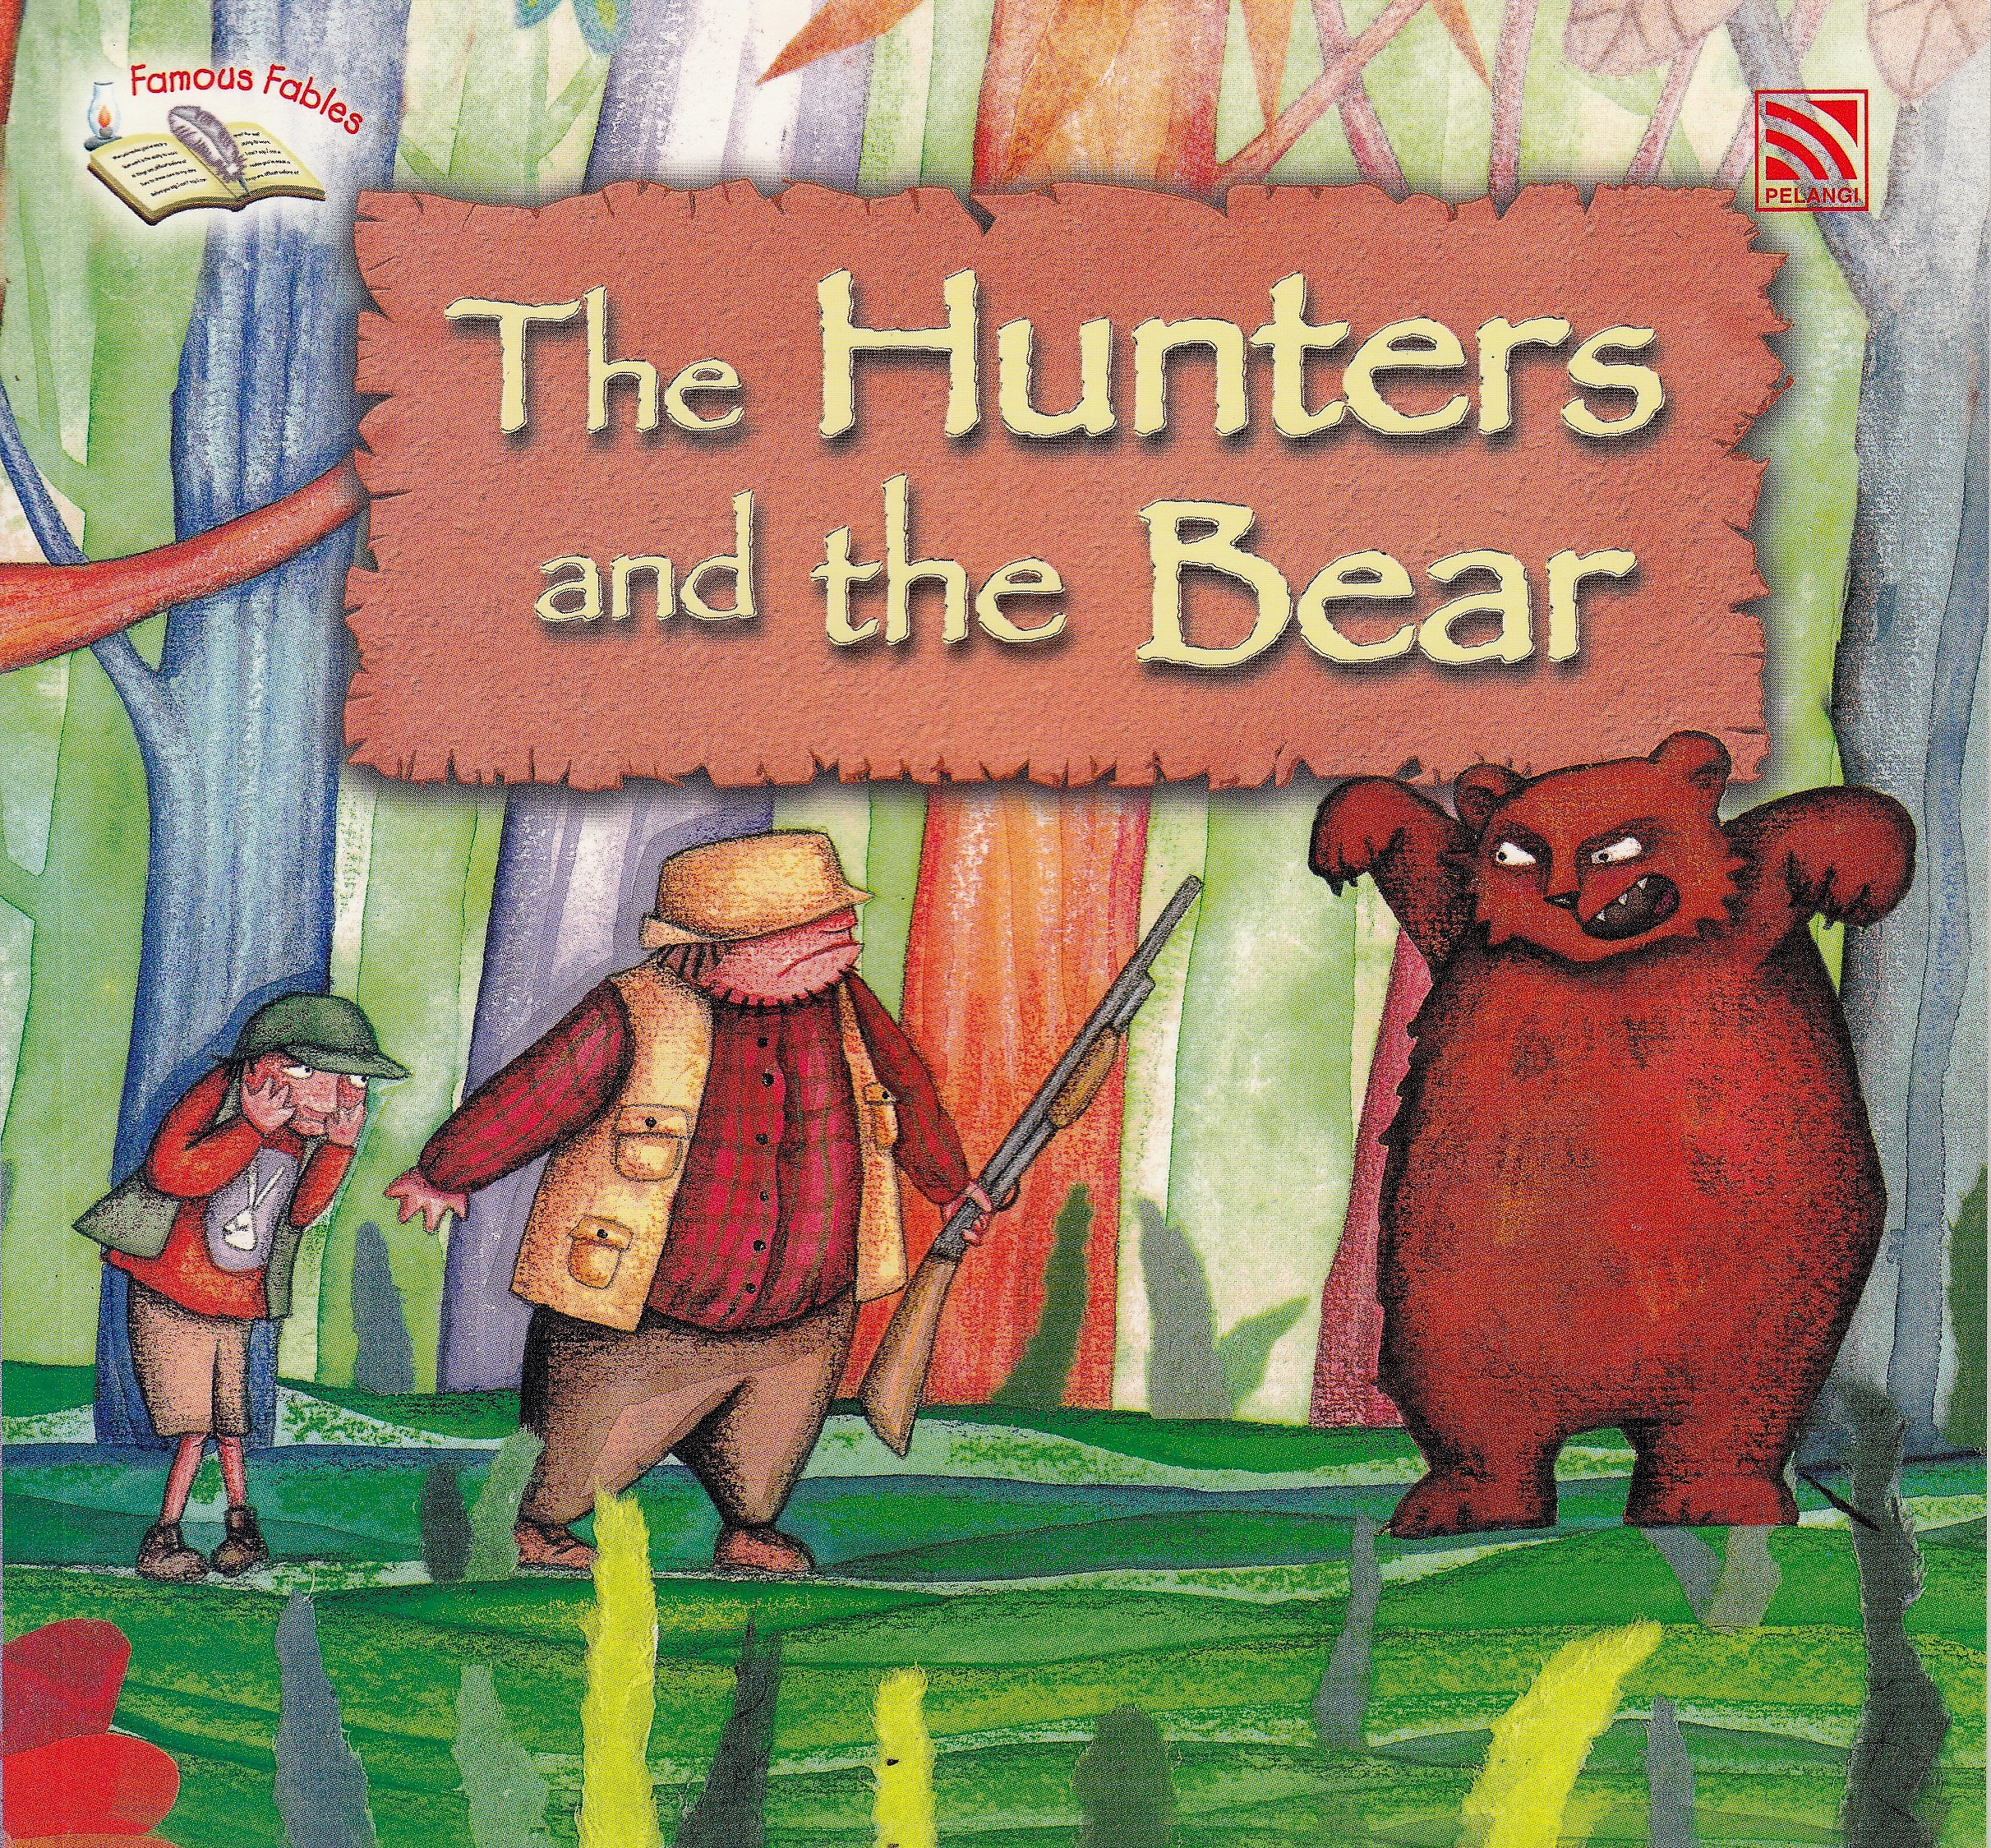 The Hunters and the Bear